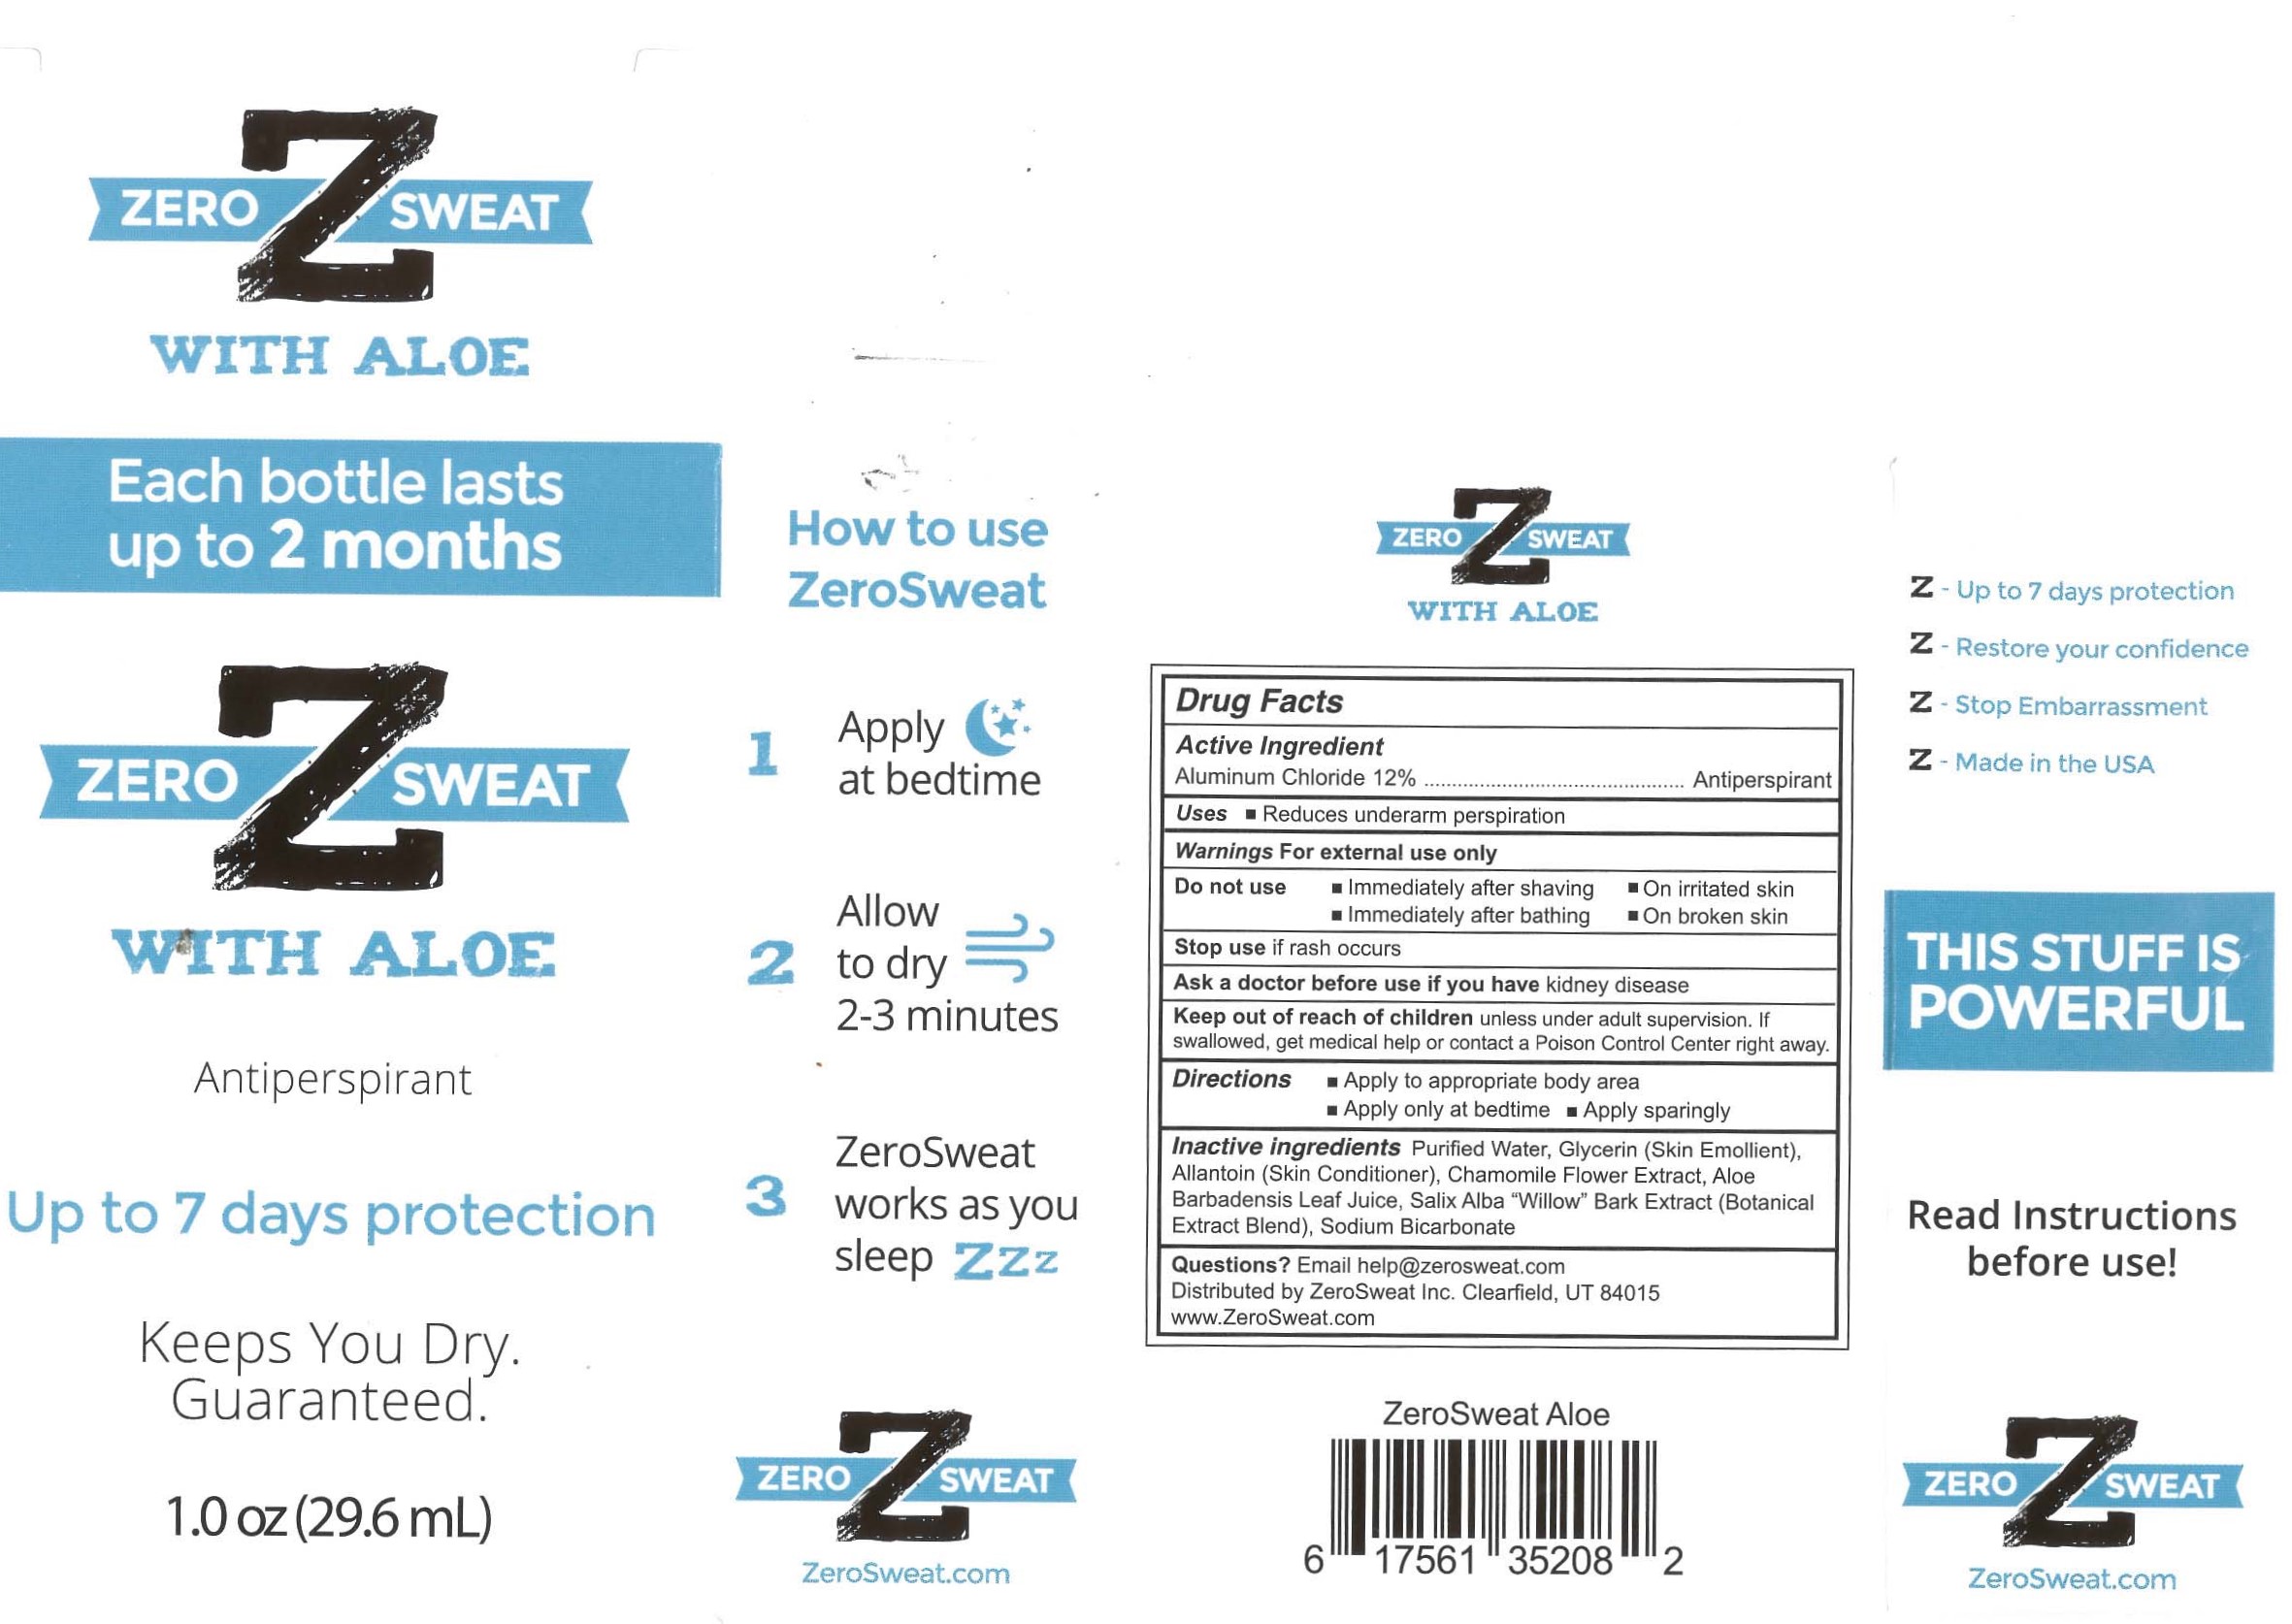 NDC 65112-259 Zerosweat With Aloe Images - Packaging, Labeling & Appearance